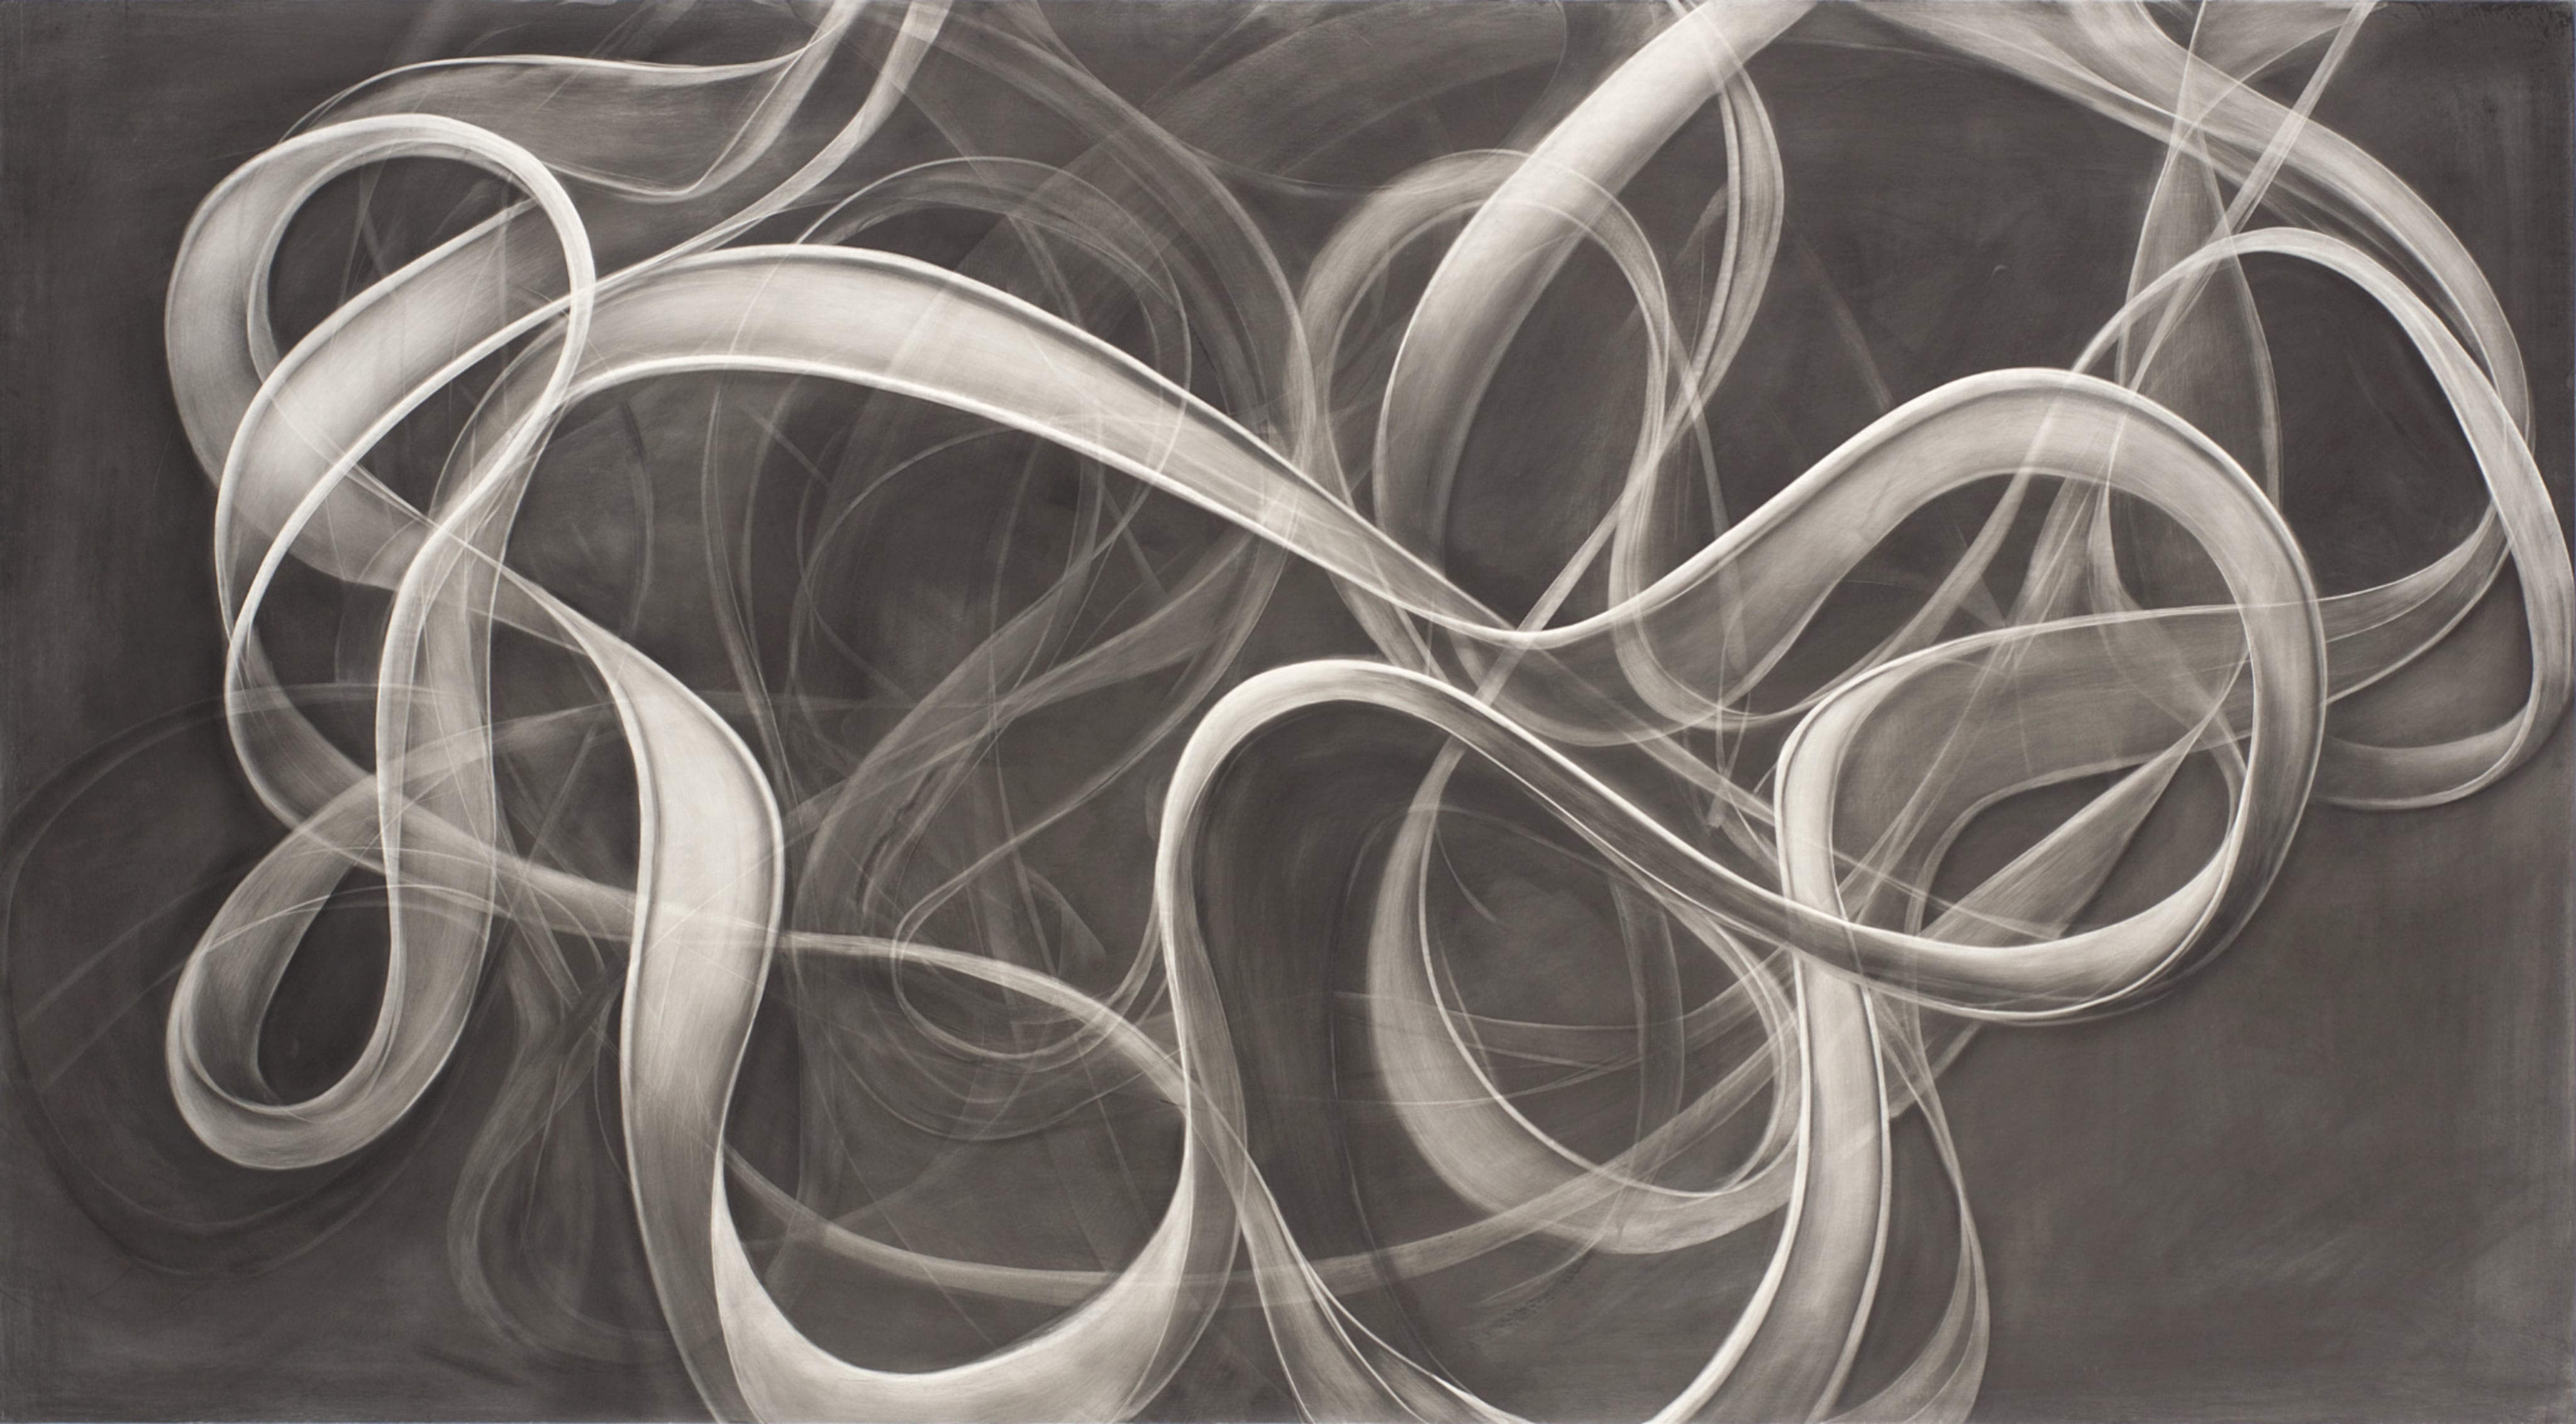 Pierrepont, 42 x 76, oil, alkyd and graphite on linen, 2014